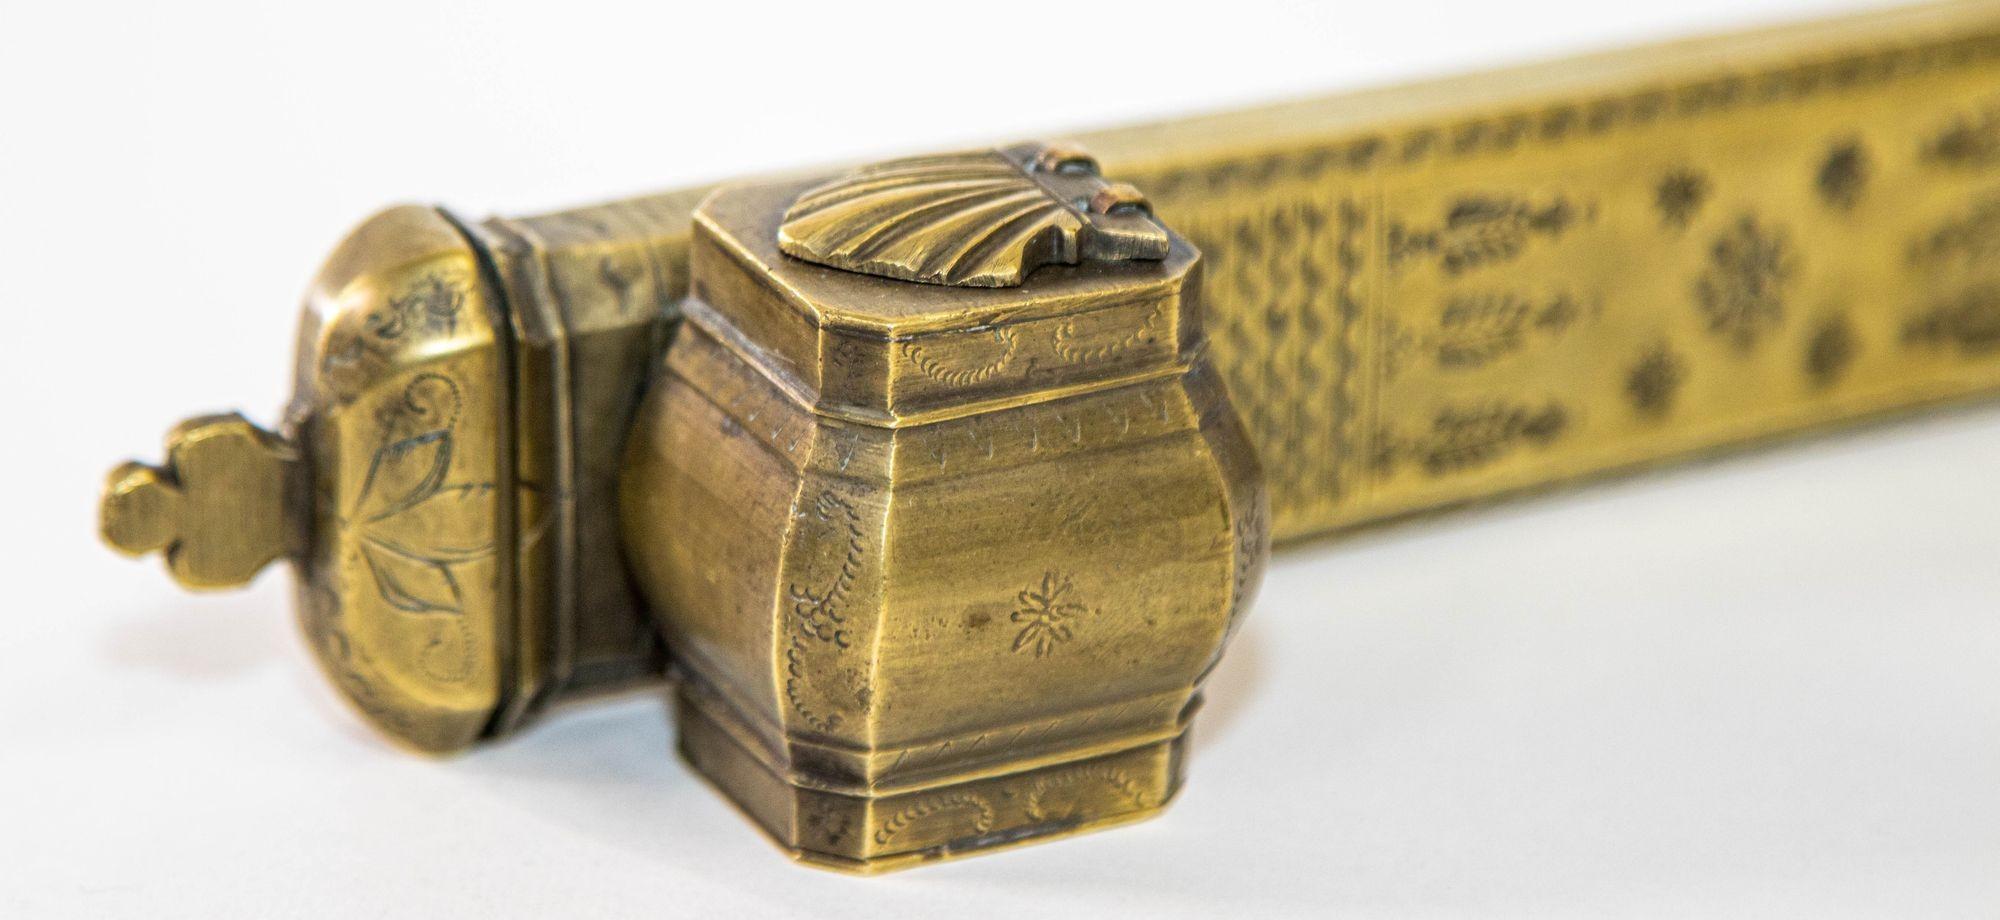 Antique Middle Eastern Brass Inkwell Qalamdan.
A 19th century brass decorated Middle Eastern Islamic Qalamdan. The Qalamdan is in solid brass, etched on all sides with engraved geometric patterns on the lapels.
It consists of an inkwell and a pen